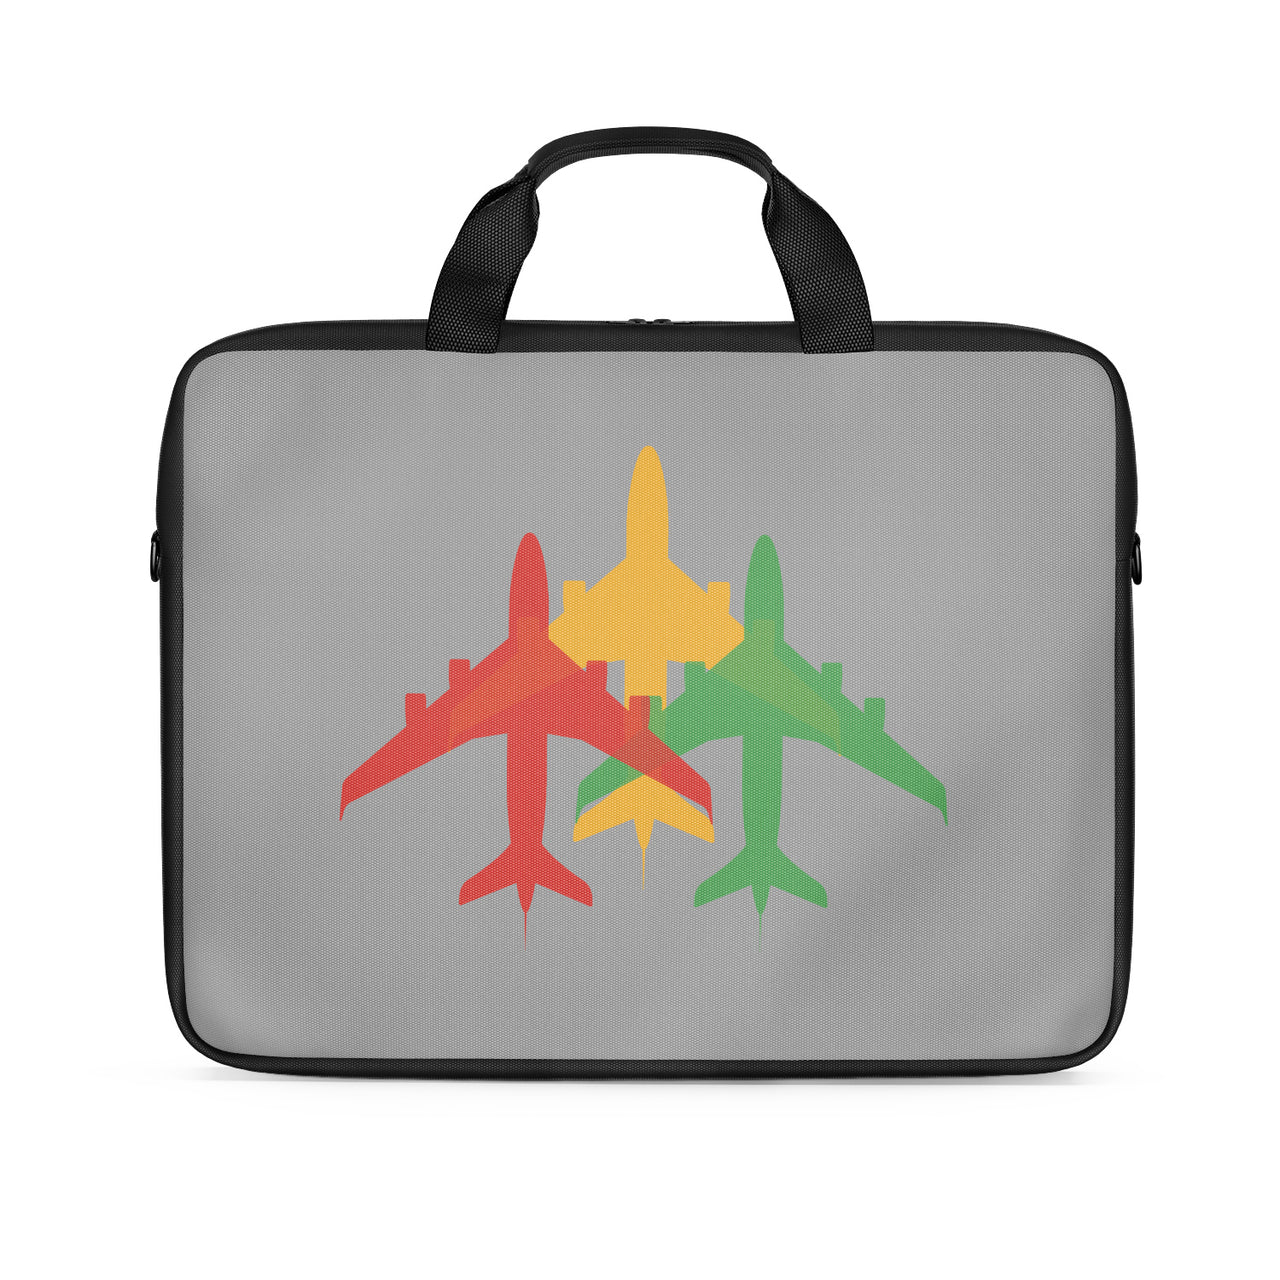 Colourful 3 Airplanes Designed Laptop & Tablet Bags